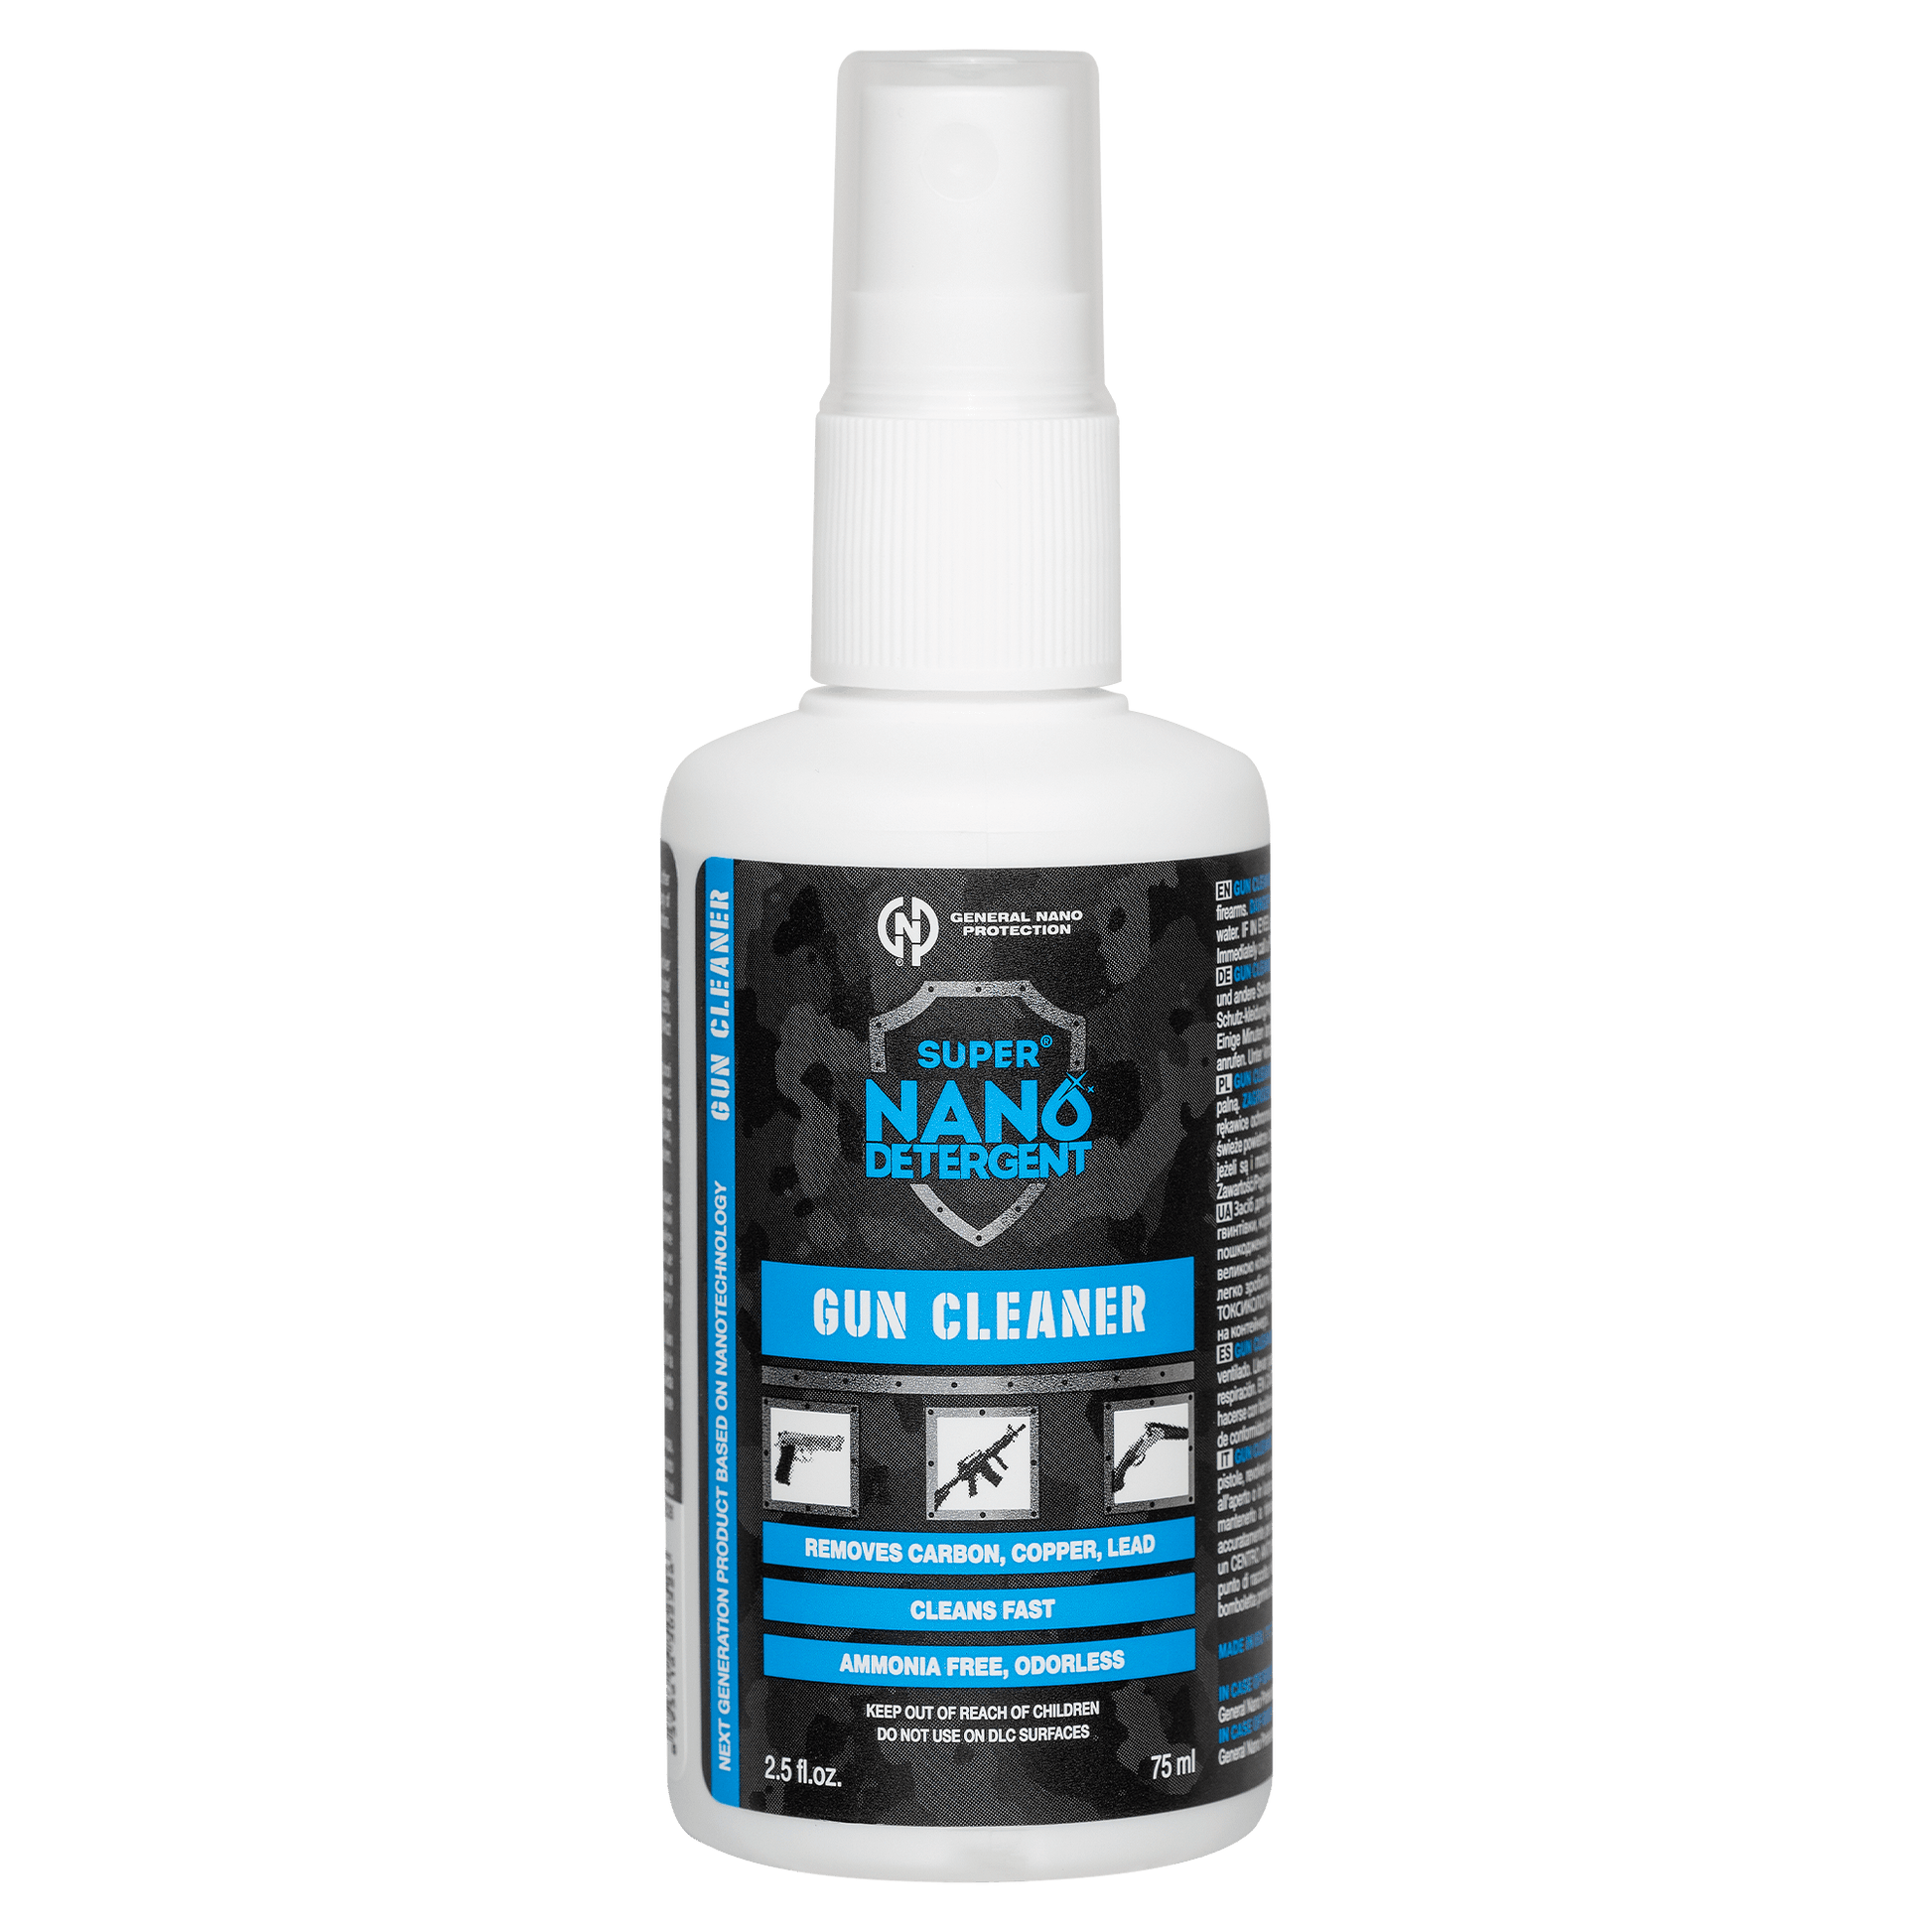 Gun cleaner 2.5 Fl oz picture of product